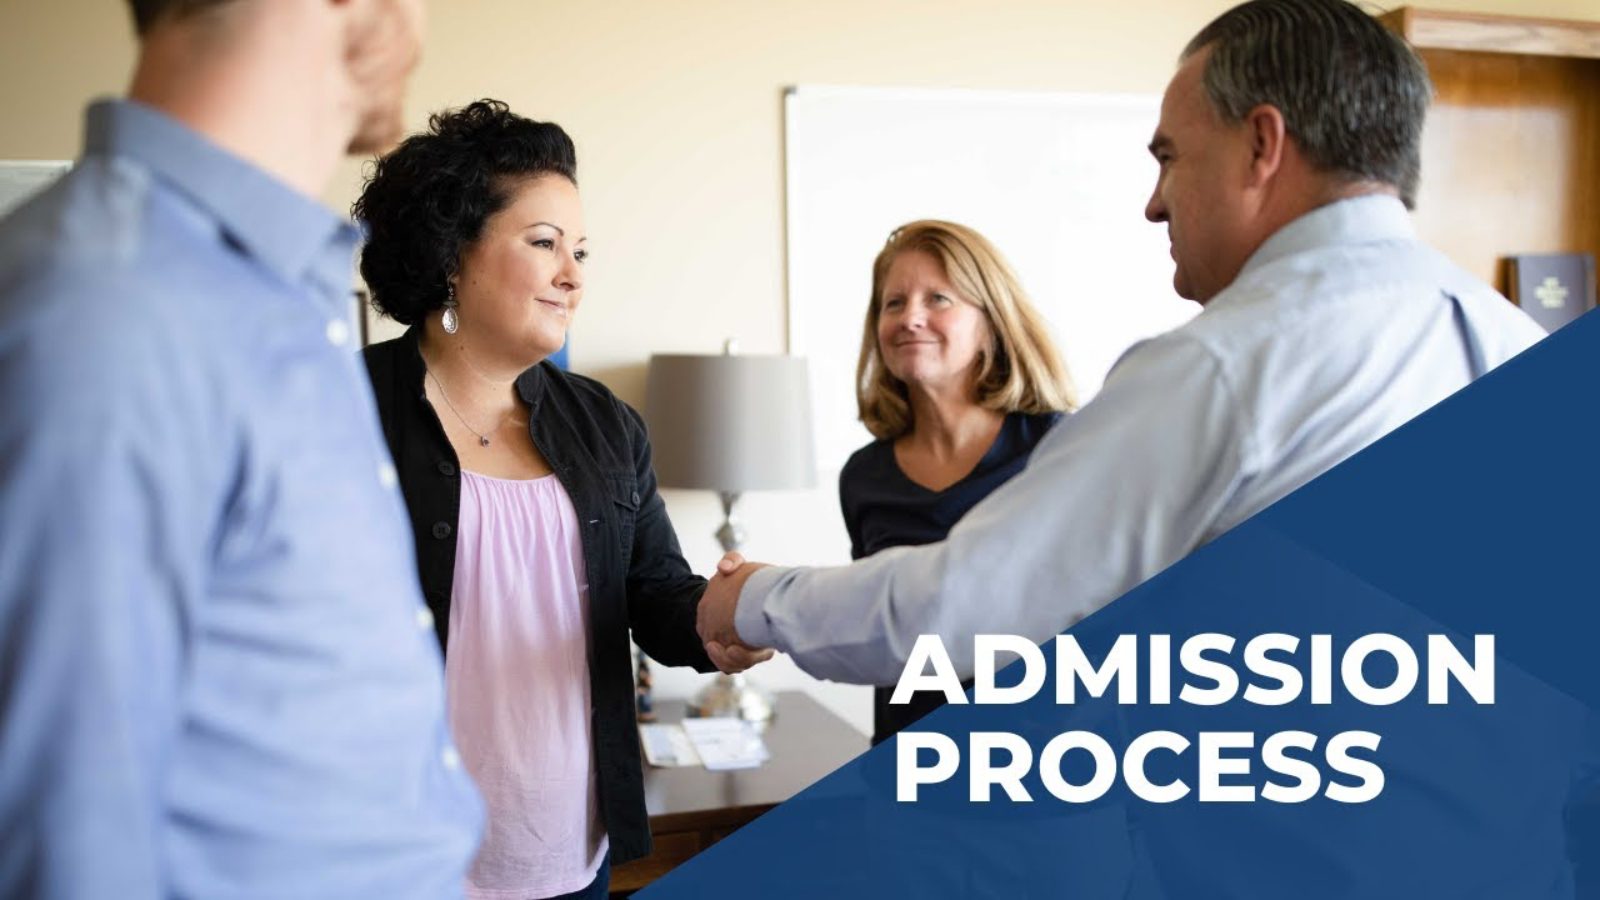 The Admissions Process at Sandstone Care